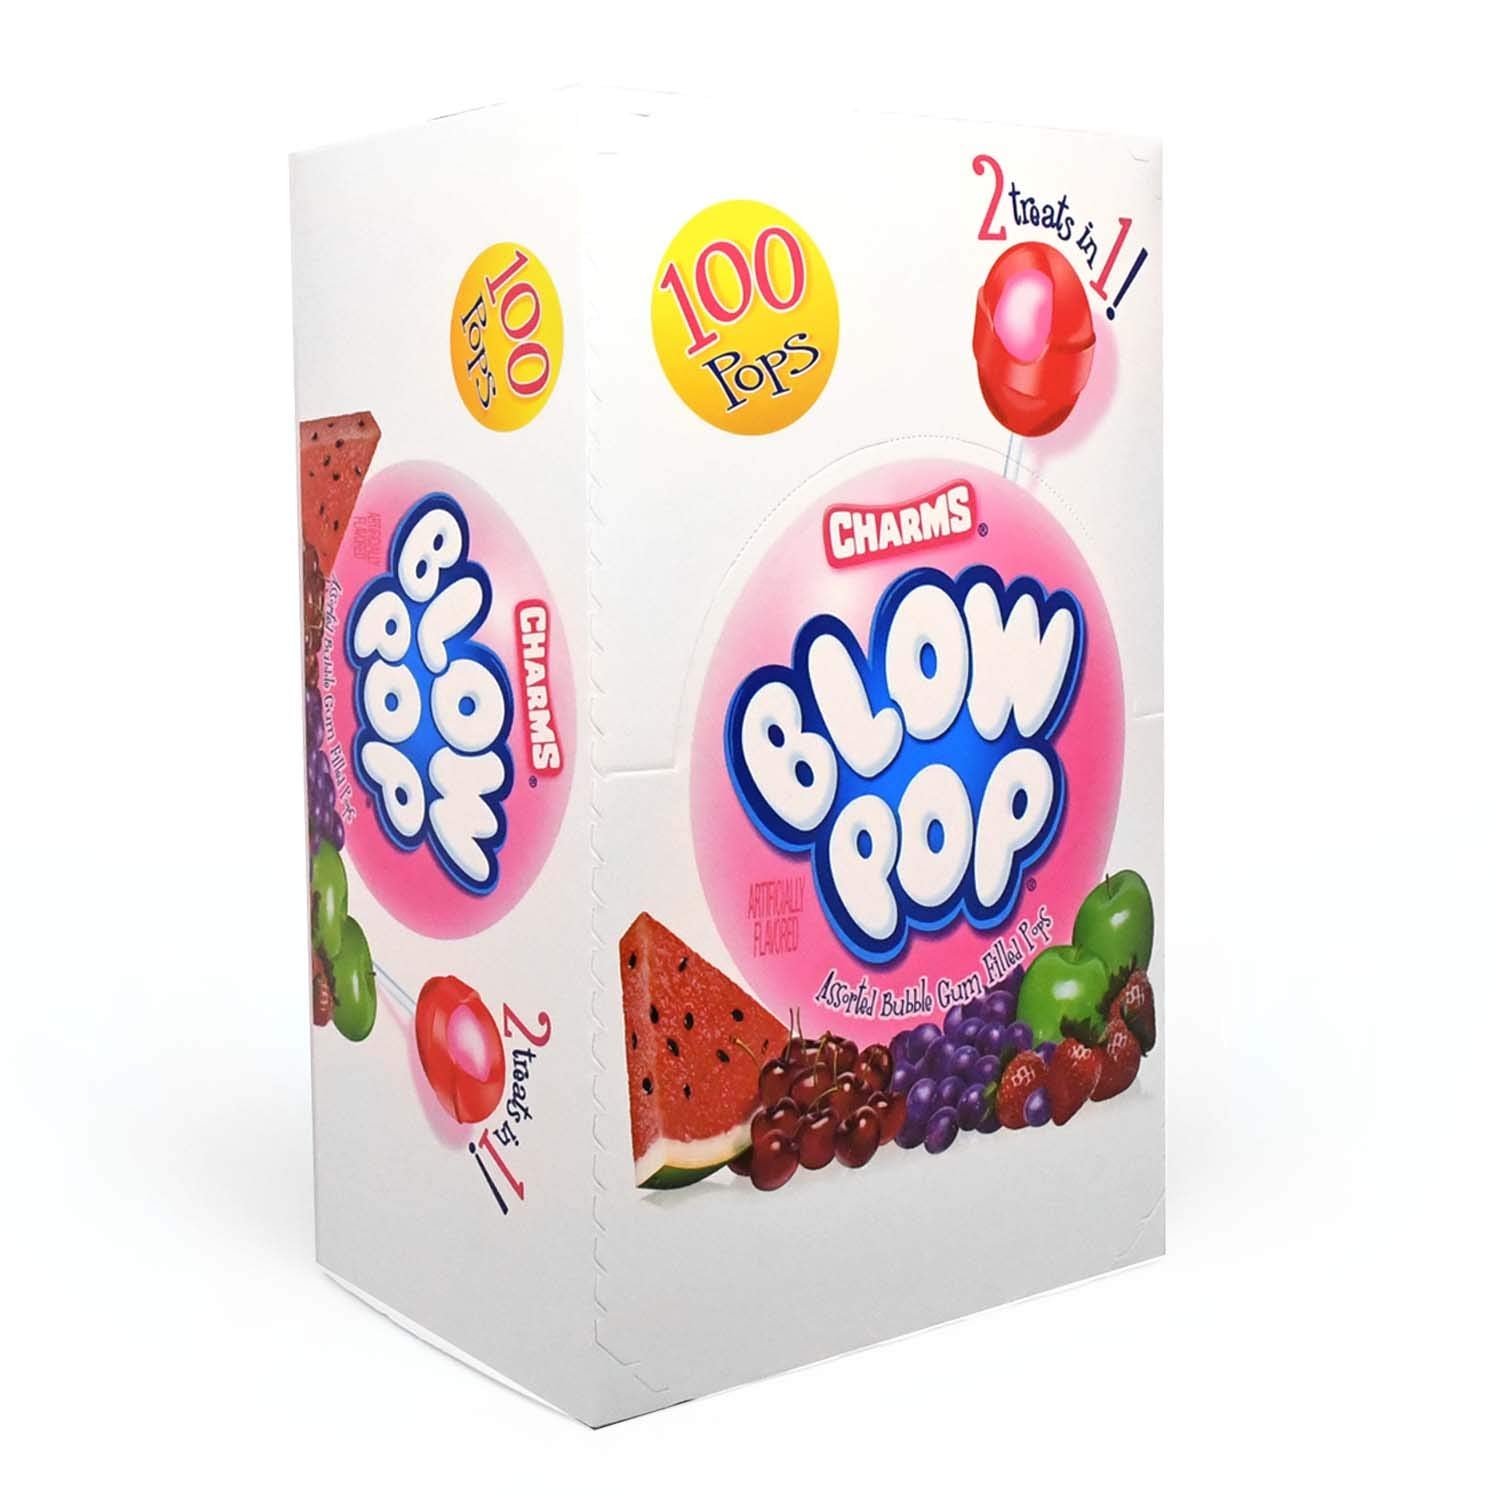 Charms-Charms Blow Pops Assorted Flavors Changemaker-03869-Box of 100-Legacy Toys